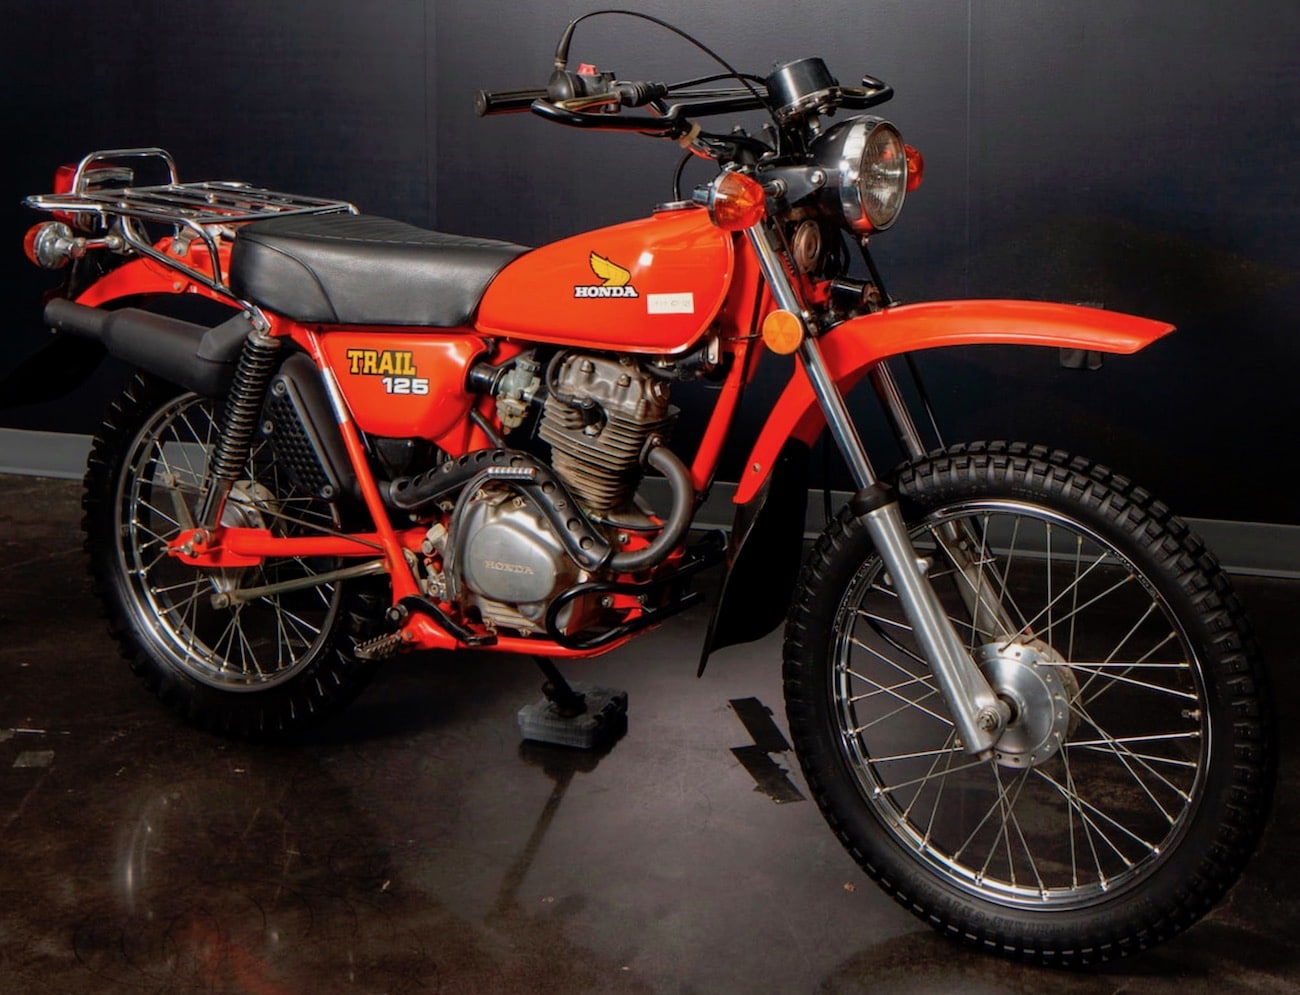 Fishermen Rejoice Honda Trail Ct125 Could Be Coming Back In 2021